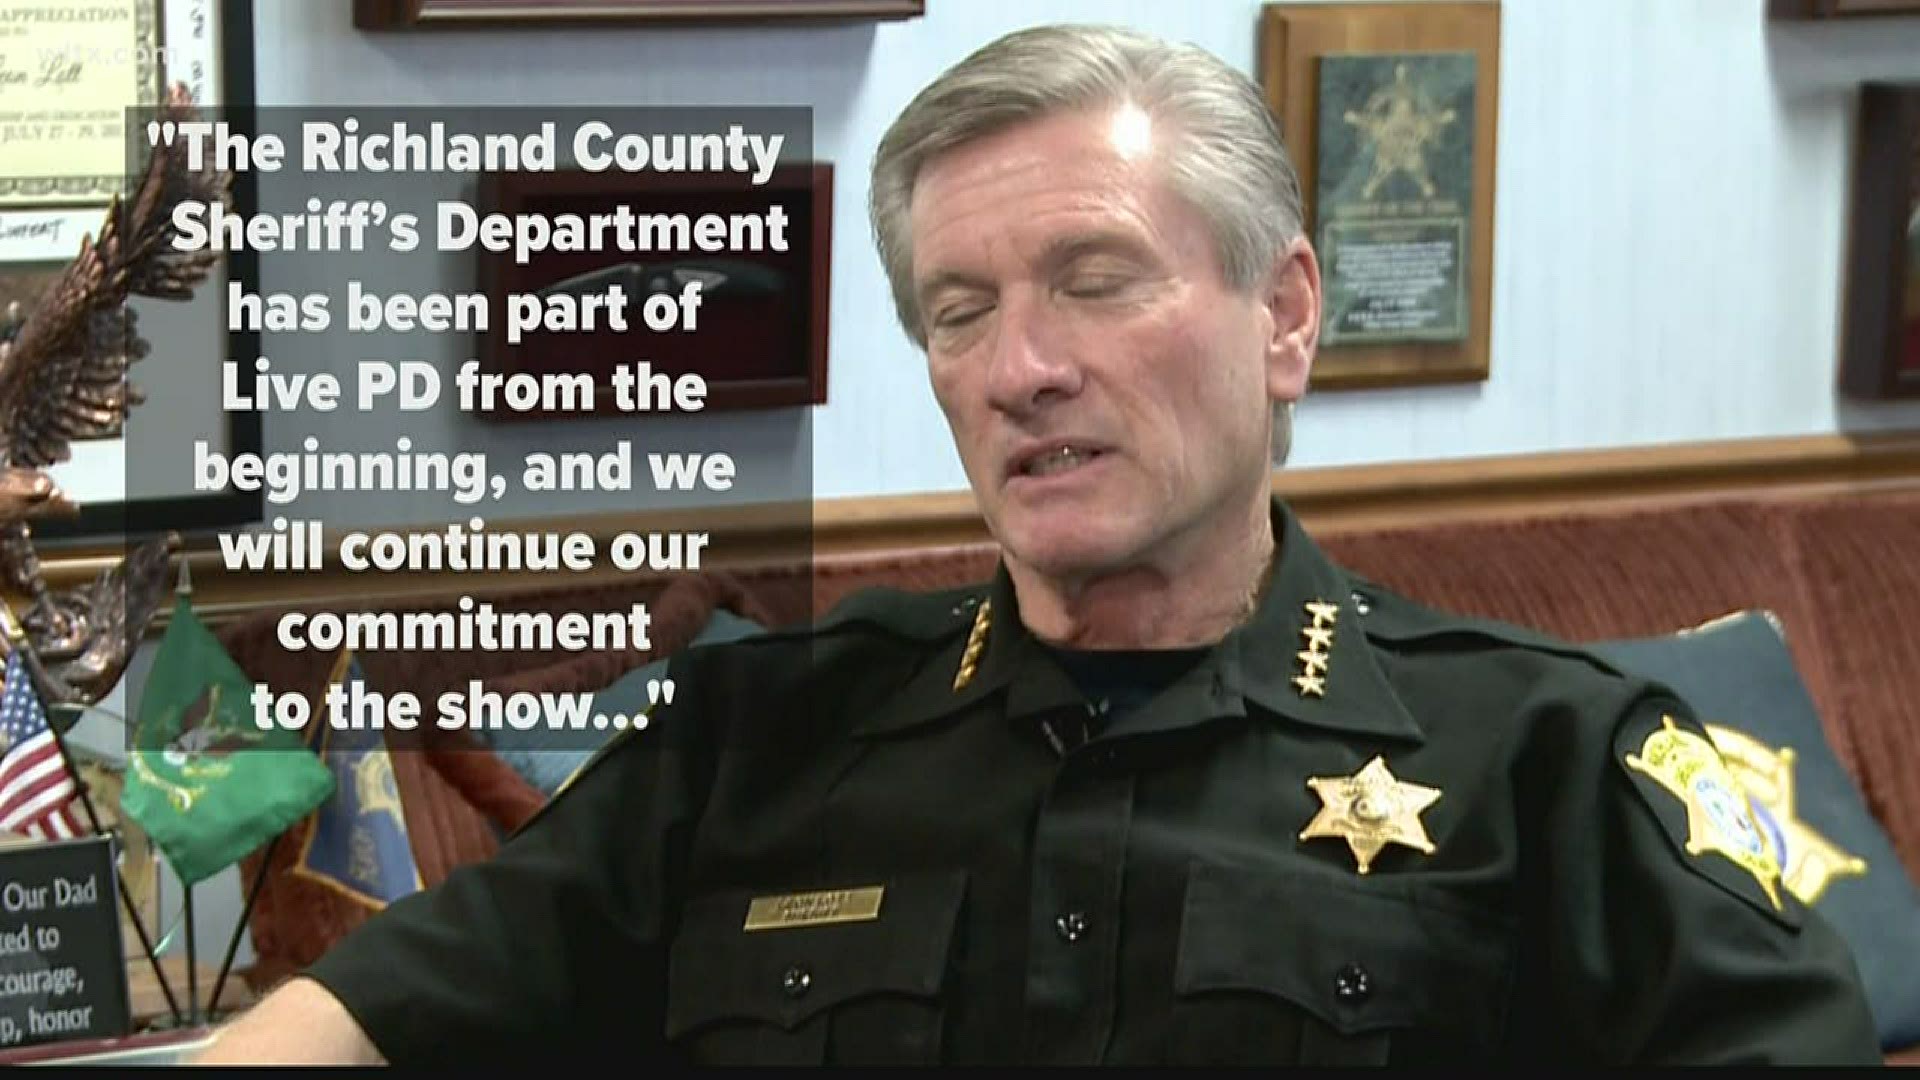 Sheriff Lott says that the department will continue their partnership with 'LivePD'